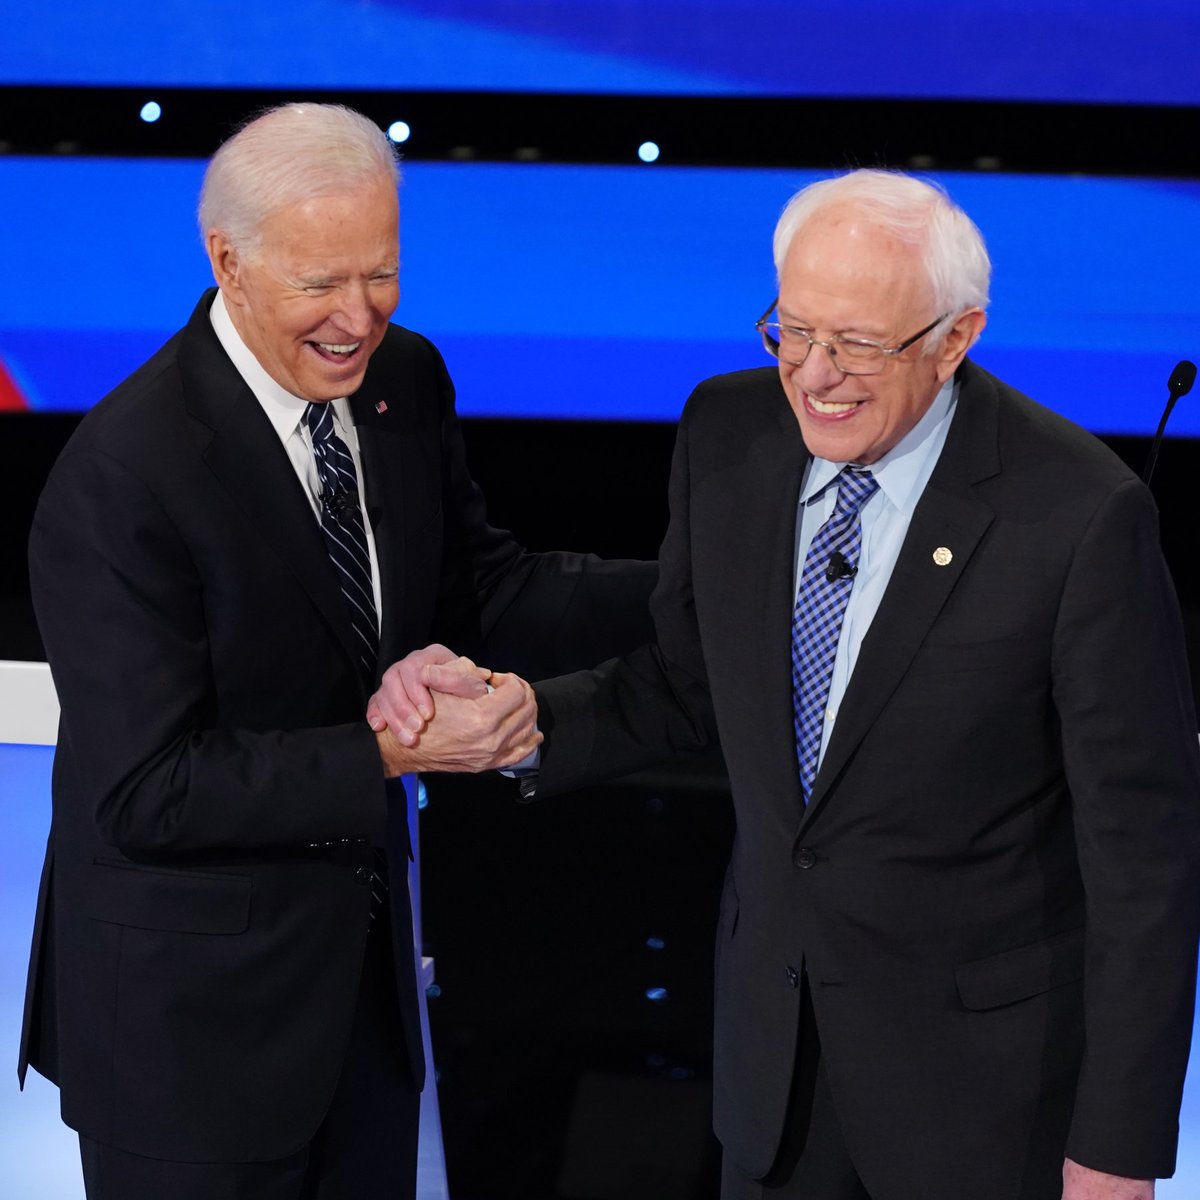 🚨 GIVE BERNIE HIS DUE Today on CNN's State of the Union, Bernie Sanders came to President Biden's defense and hit Cornell West over his criticism of the president: Sanders: '𝘞𝘩𝘦𝘳𝘦 𝘐 𝘥𝘪𝘴𝘢𝘨𝘳𝘦𝘦 𝘸𝘪𝘵𝘩 𝘮𝘺 𝘨𝘰𝘰𝘥 𝘧𝘳𝘪𝘦𝘯𝘥 𝘊𝘰𝘳𝘯𝘦𝘭 𝘞𝘦𝘴𝘵 𝘪𝘴 𝘐…